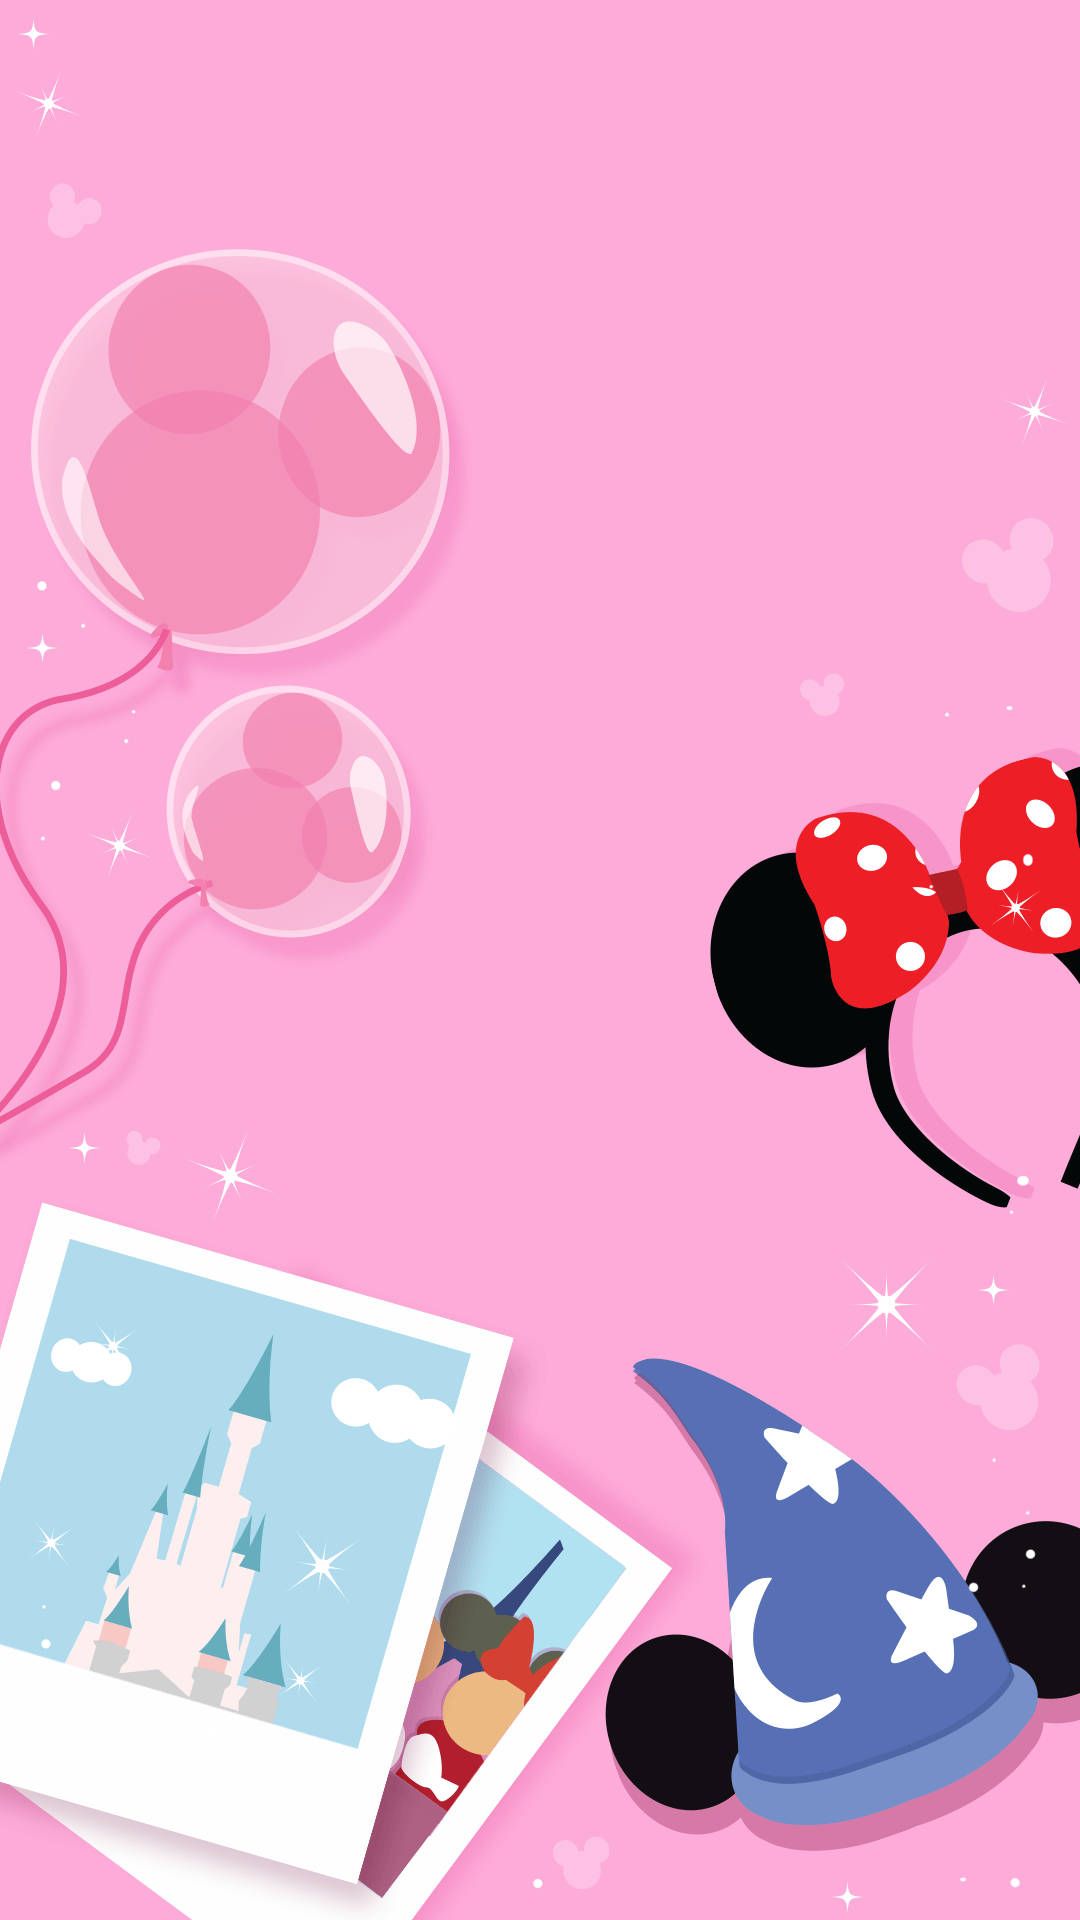 IPhone wallpaper with a pink background and Disney elements - Minnie Mouse